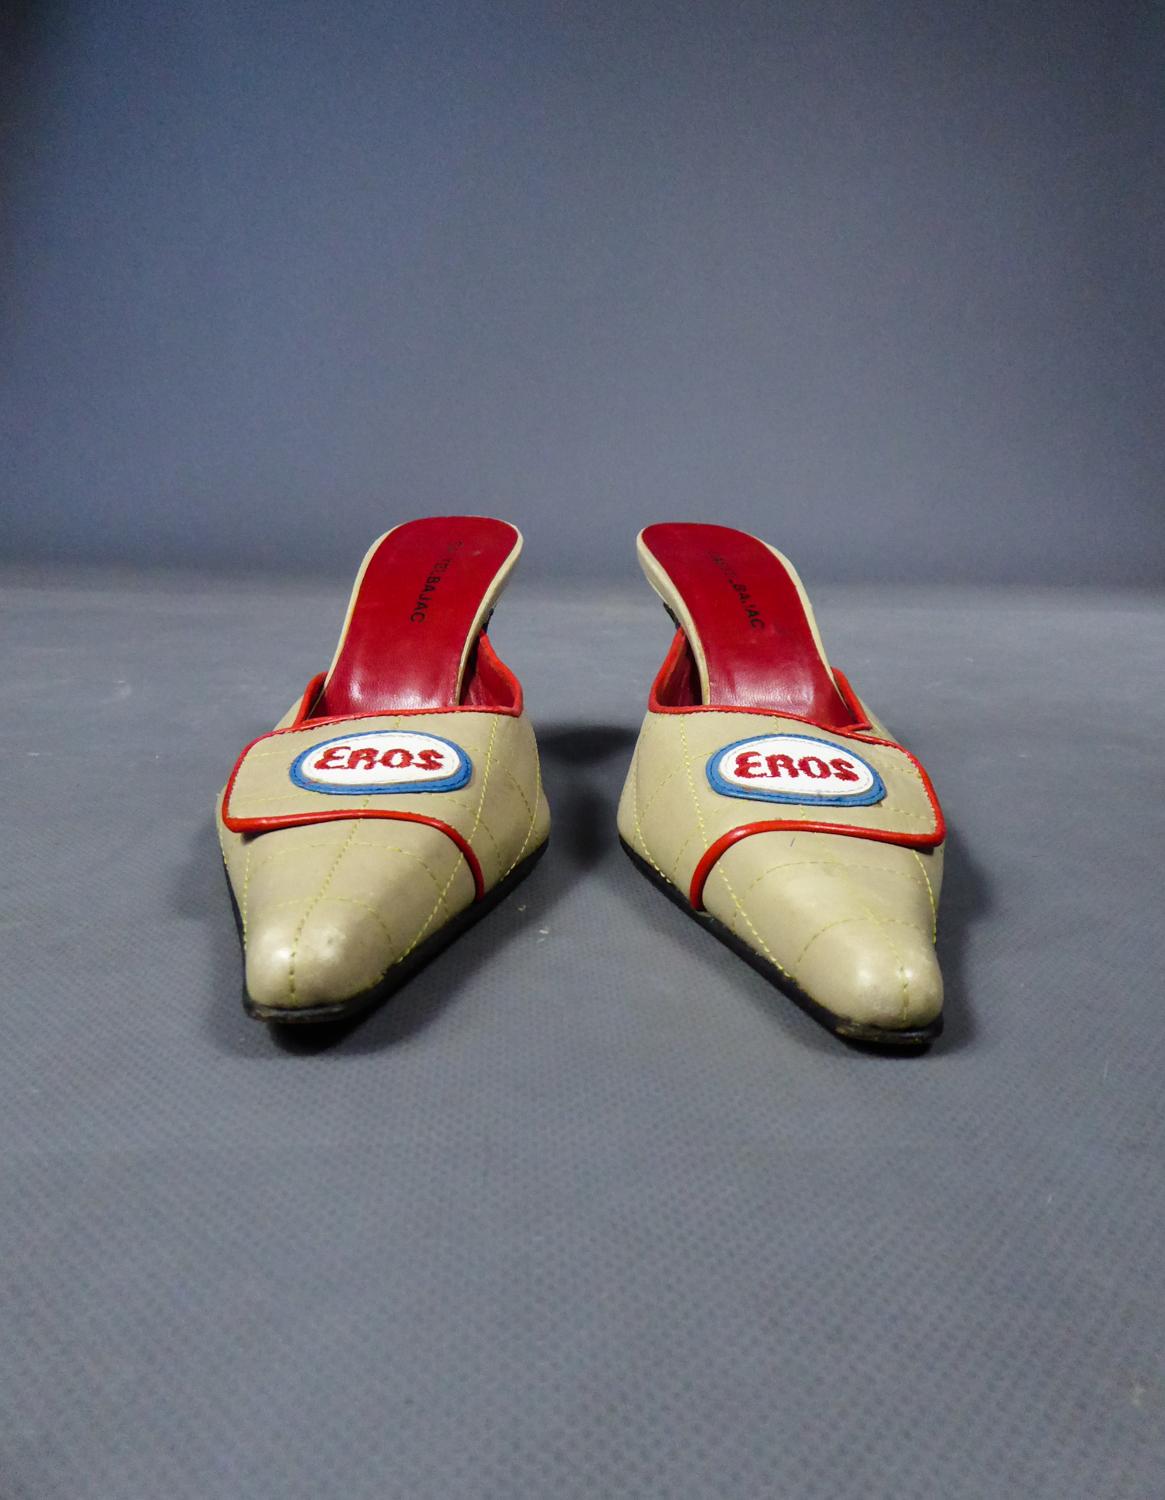 Circa 1990
France

Shoes or pair of mules in beige overstitched leather and signed Castelbajac from the 1990s. Long and pointed tips with flaps surrounded with red leather and adorned with an overstitched and embroidered label in leather indicating